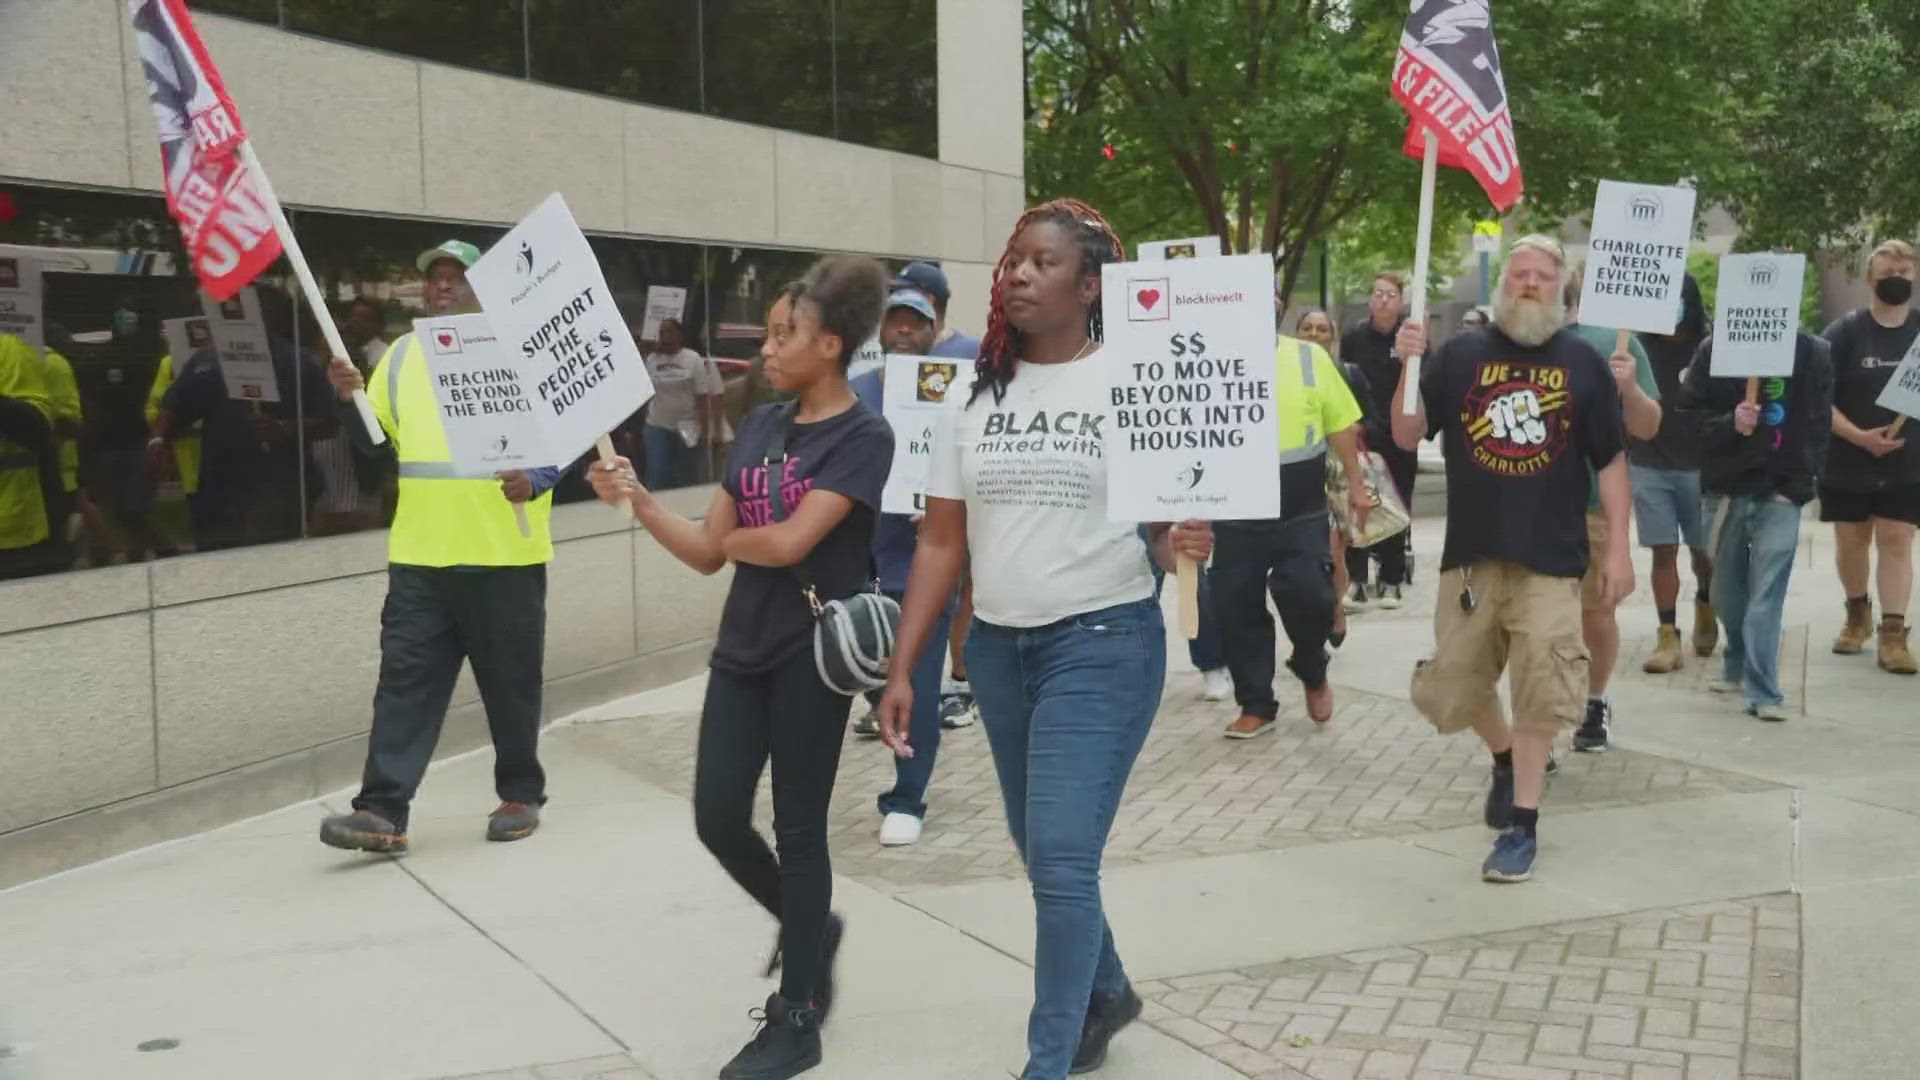 City workers rallied outside Monday's Charlotte City Council meeting as they push leaders to make their salaries a priority with the new budget.